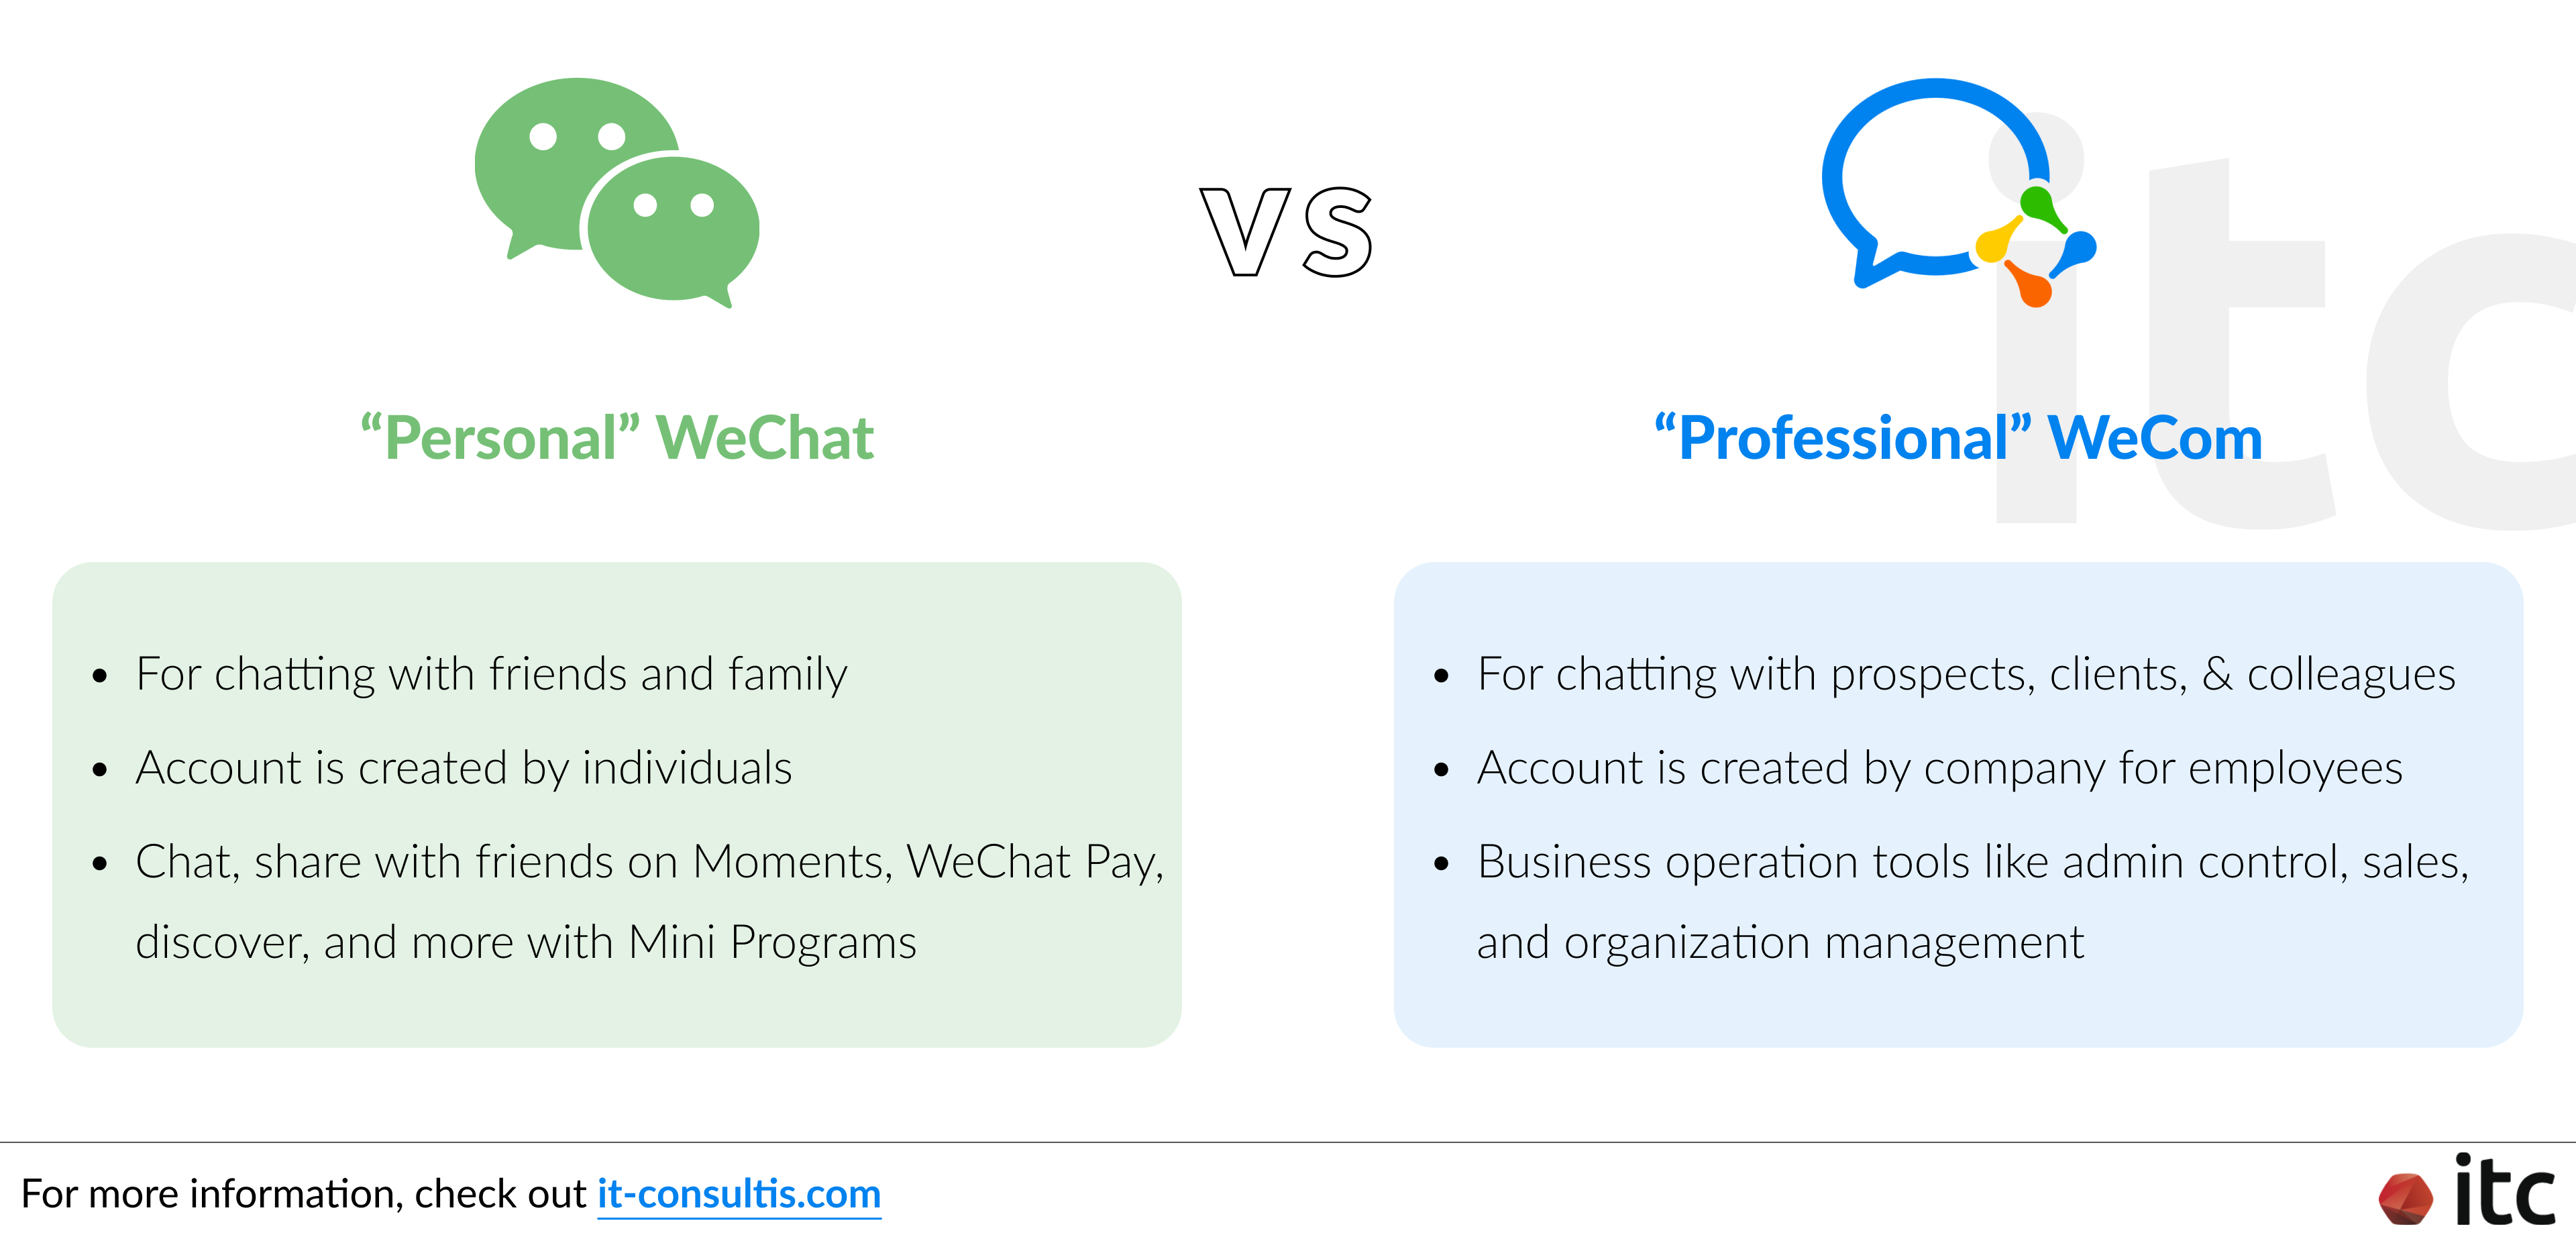 WeChat vs WeCom (WeChat Work) - how they are different in terms of purpose and functionalities